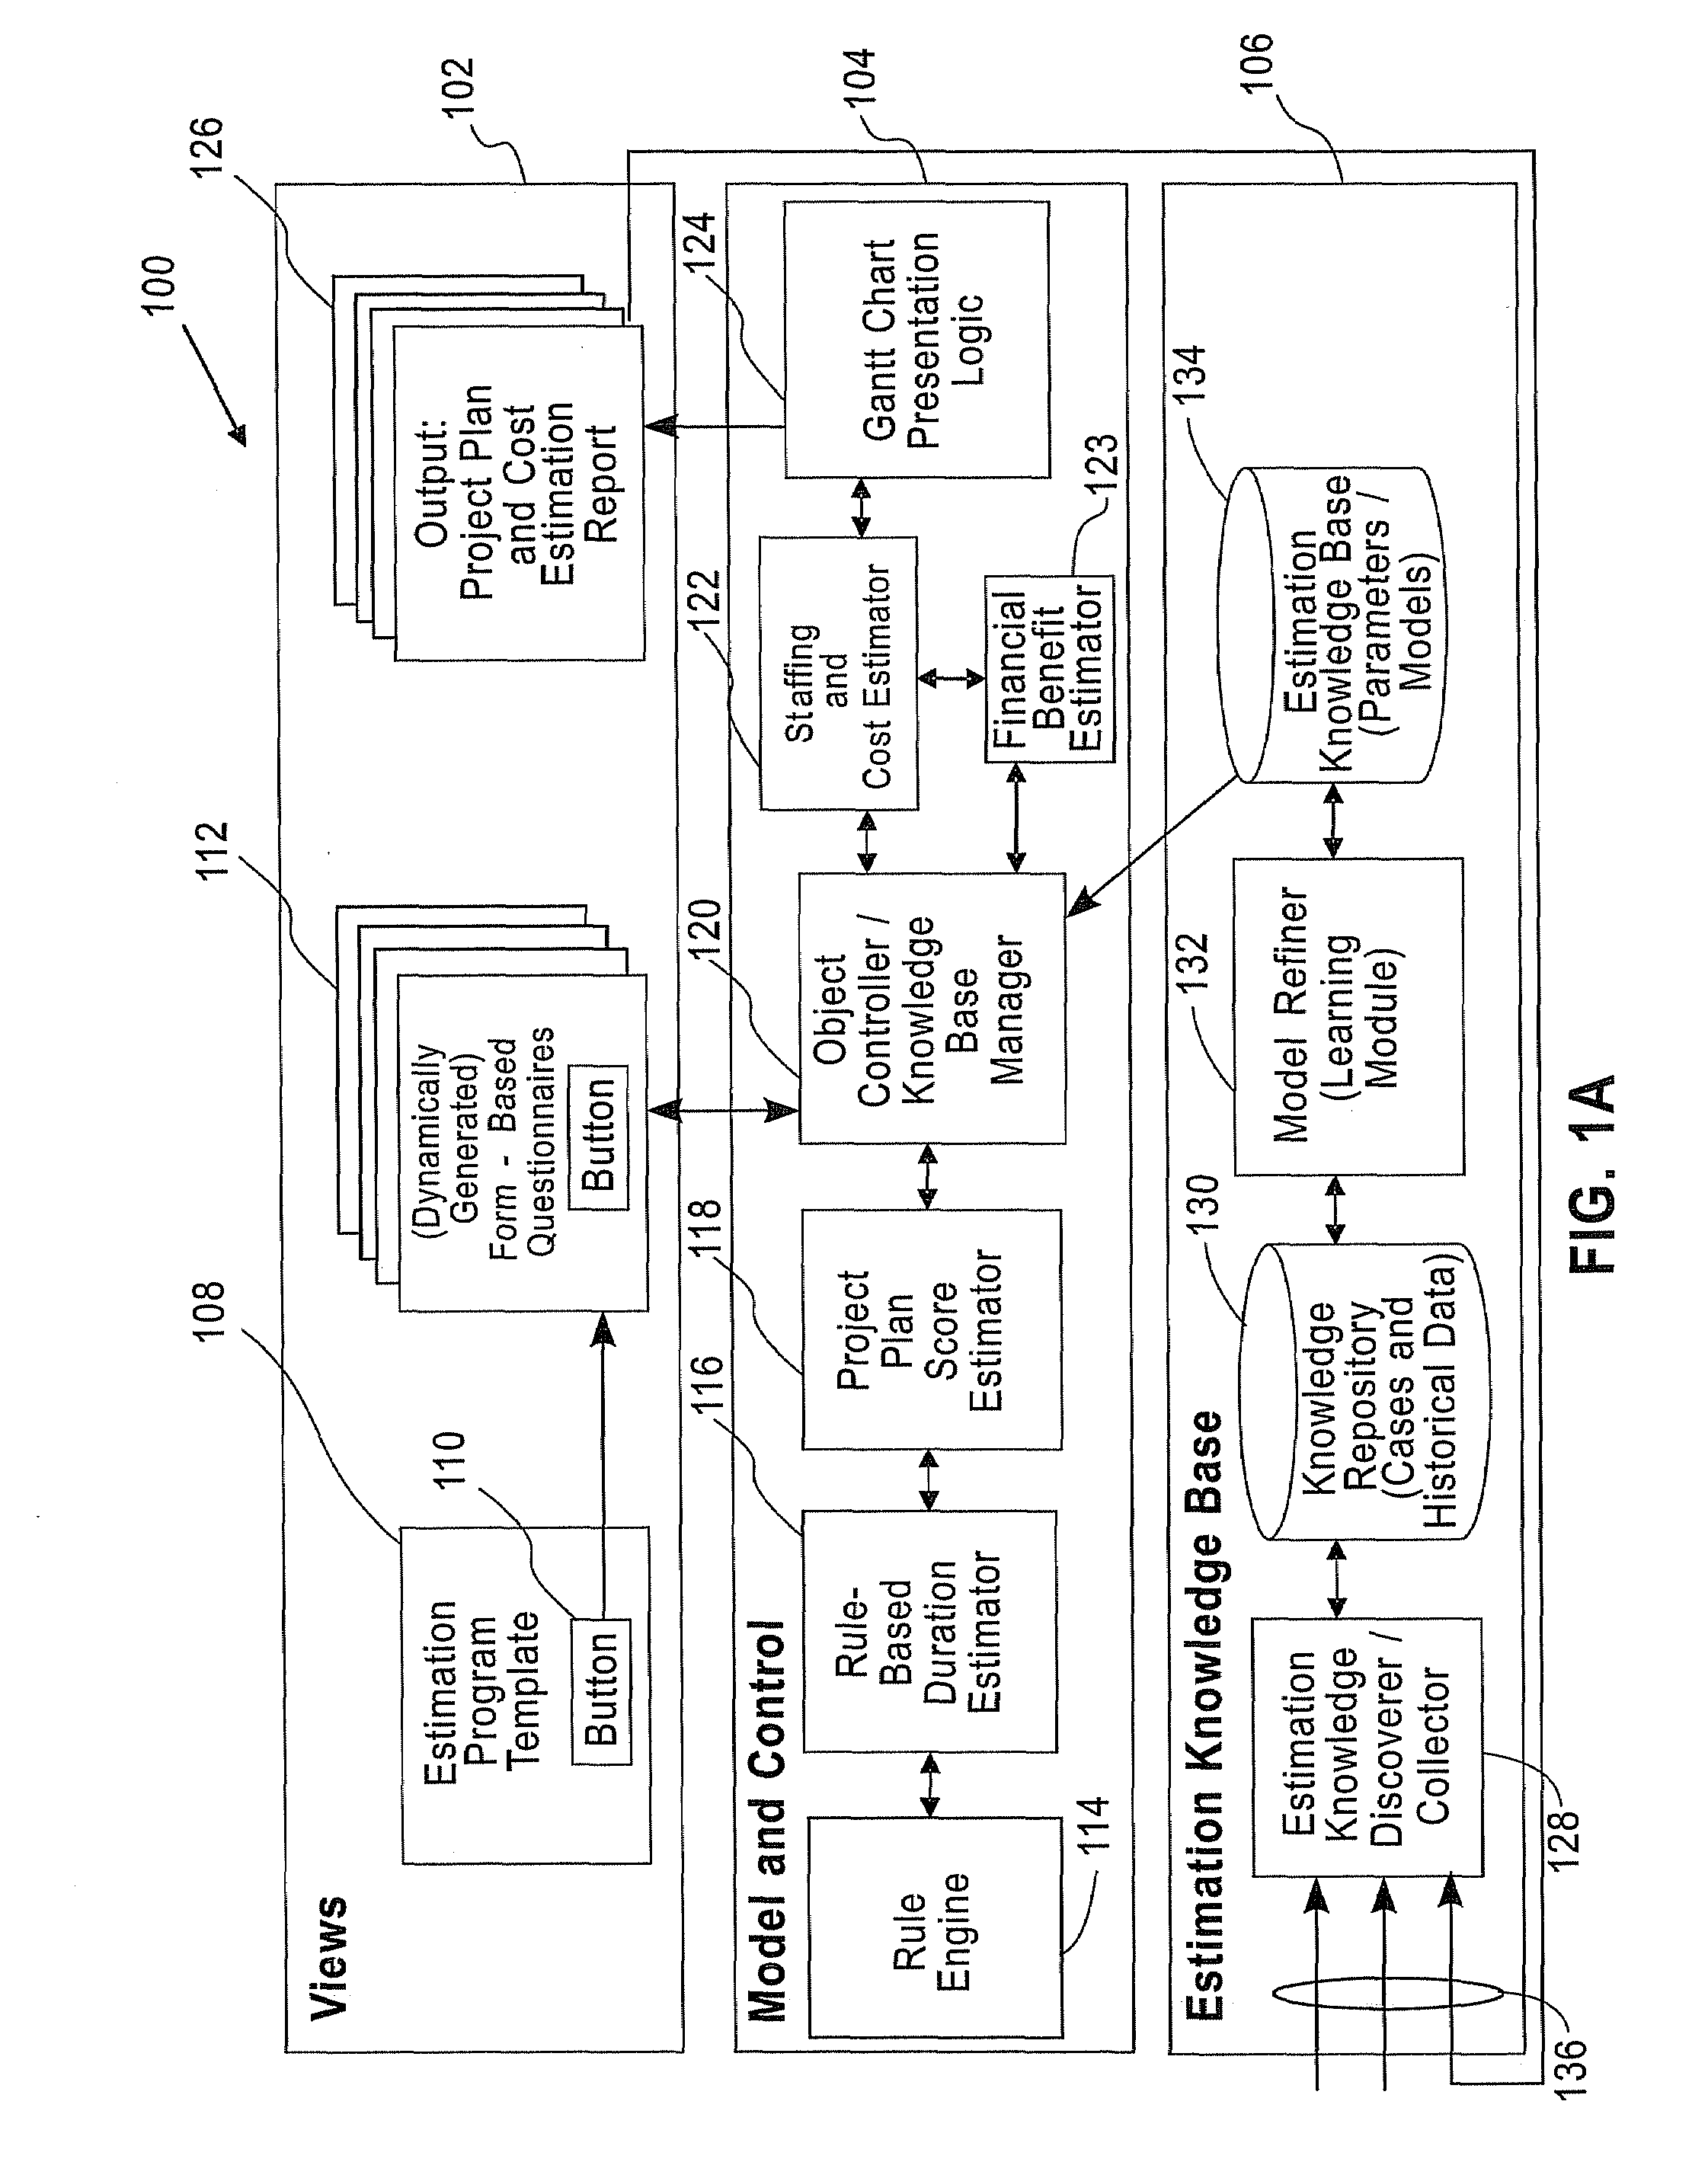 Method and system for estimating financial benefits of packaged application service projects